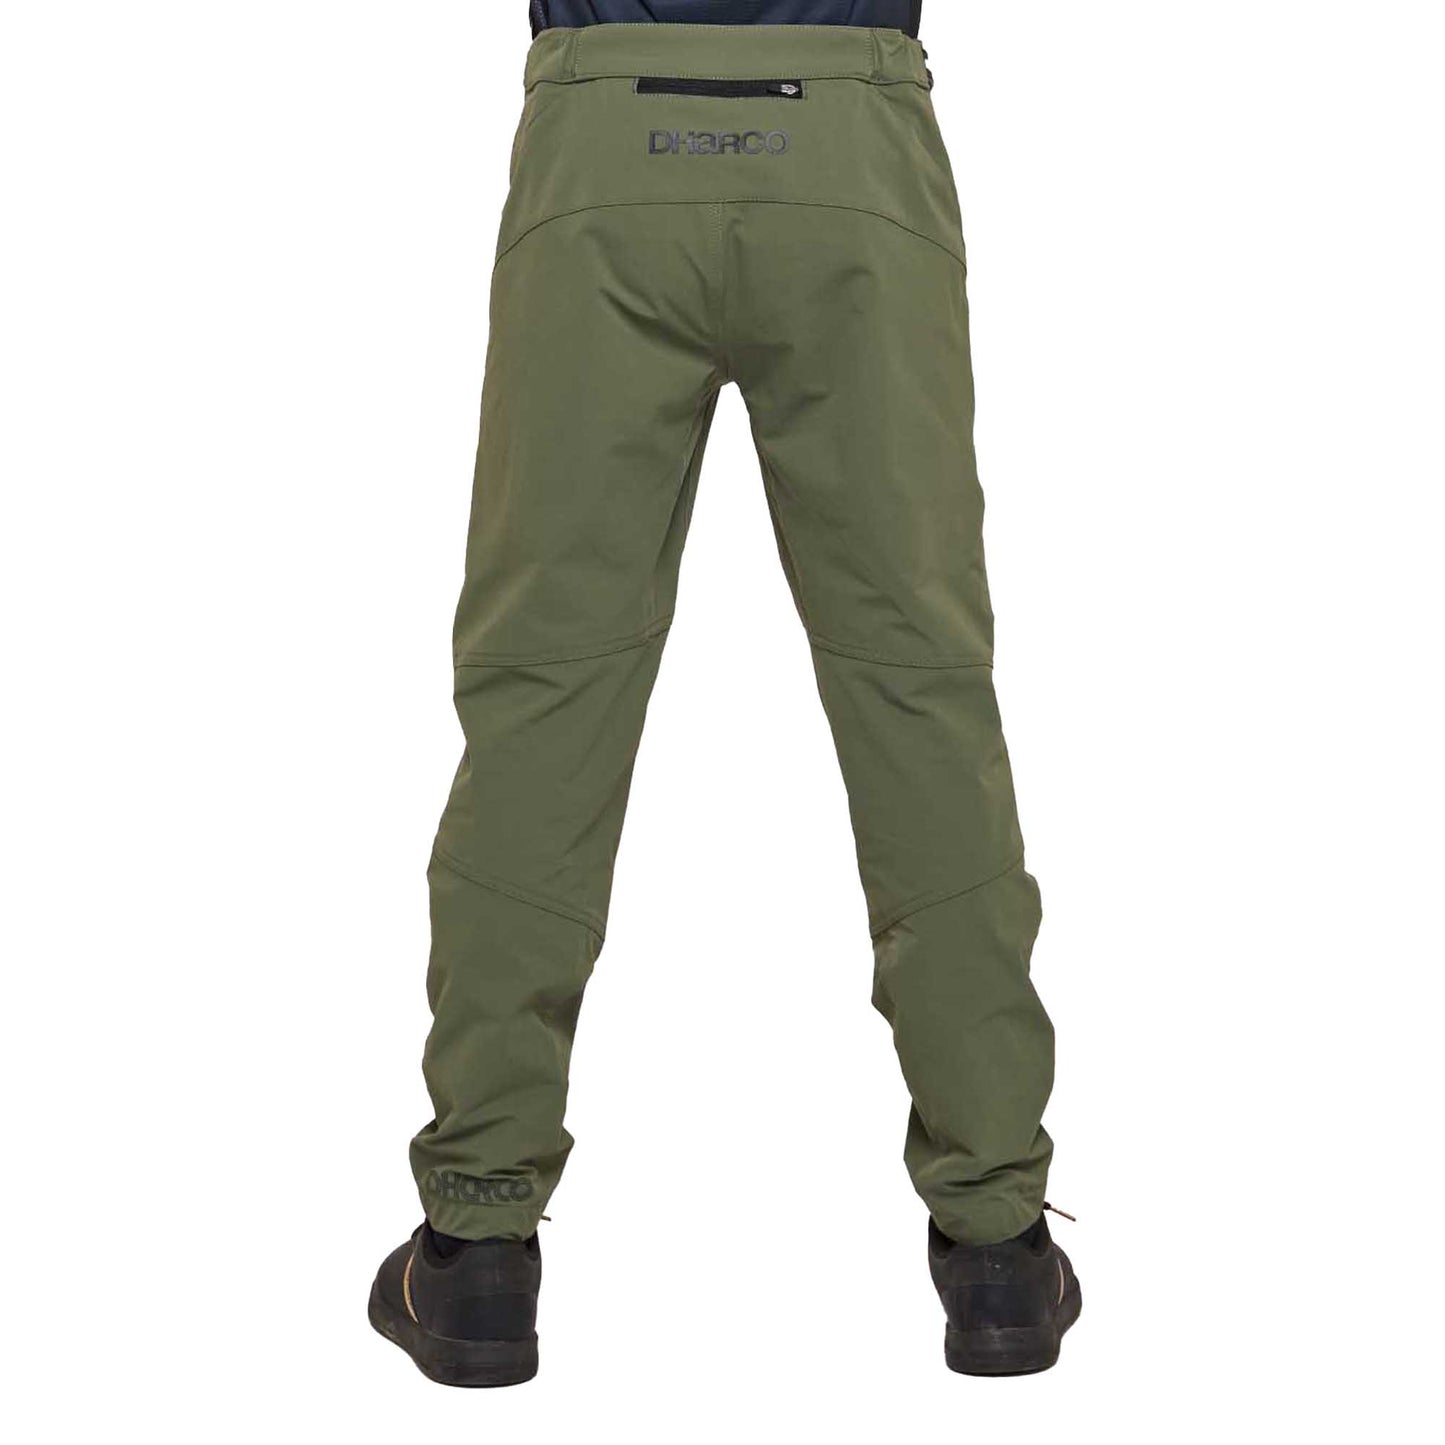 DHaRCO Youth Gravity Pants - Youth 2XL - Gorilla Green